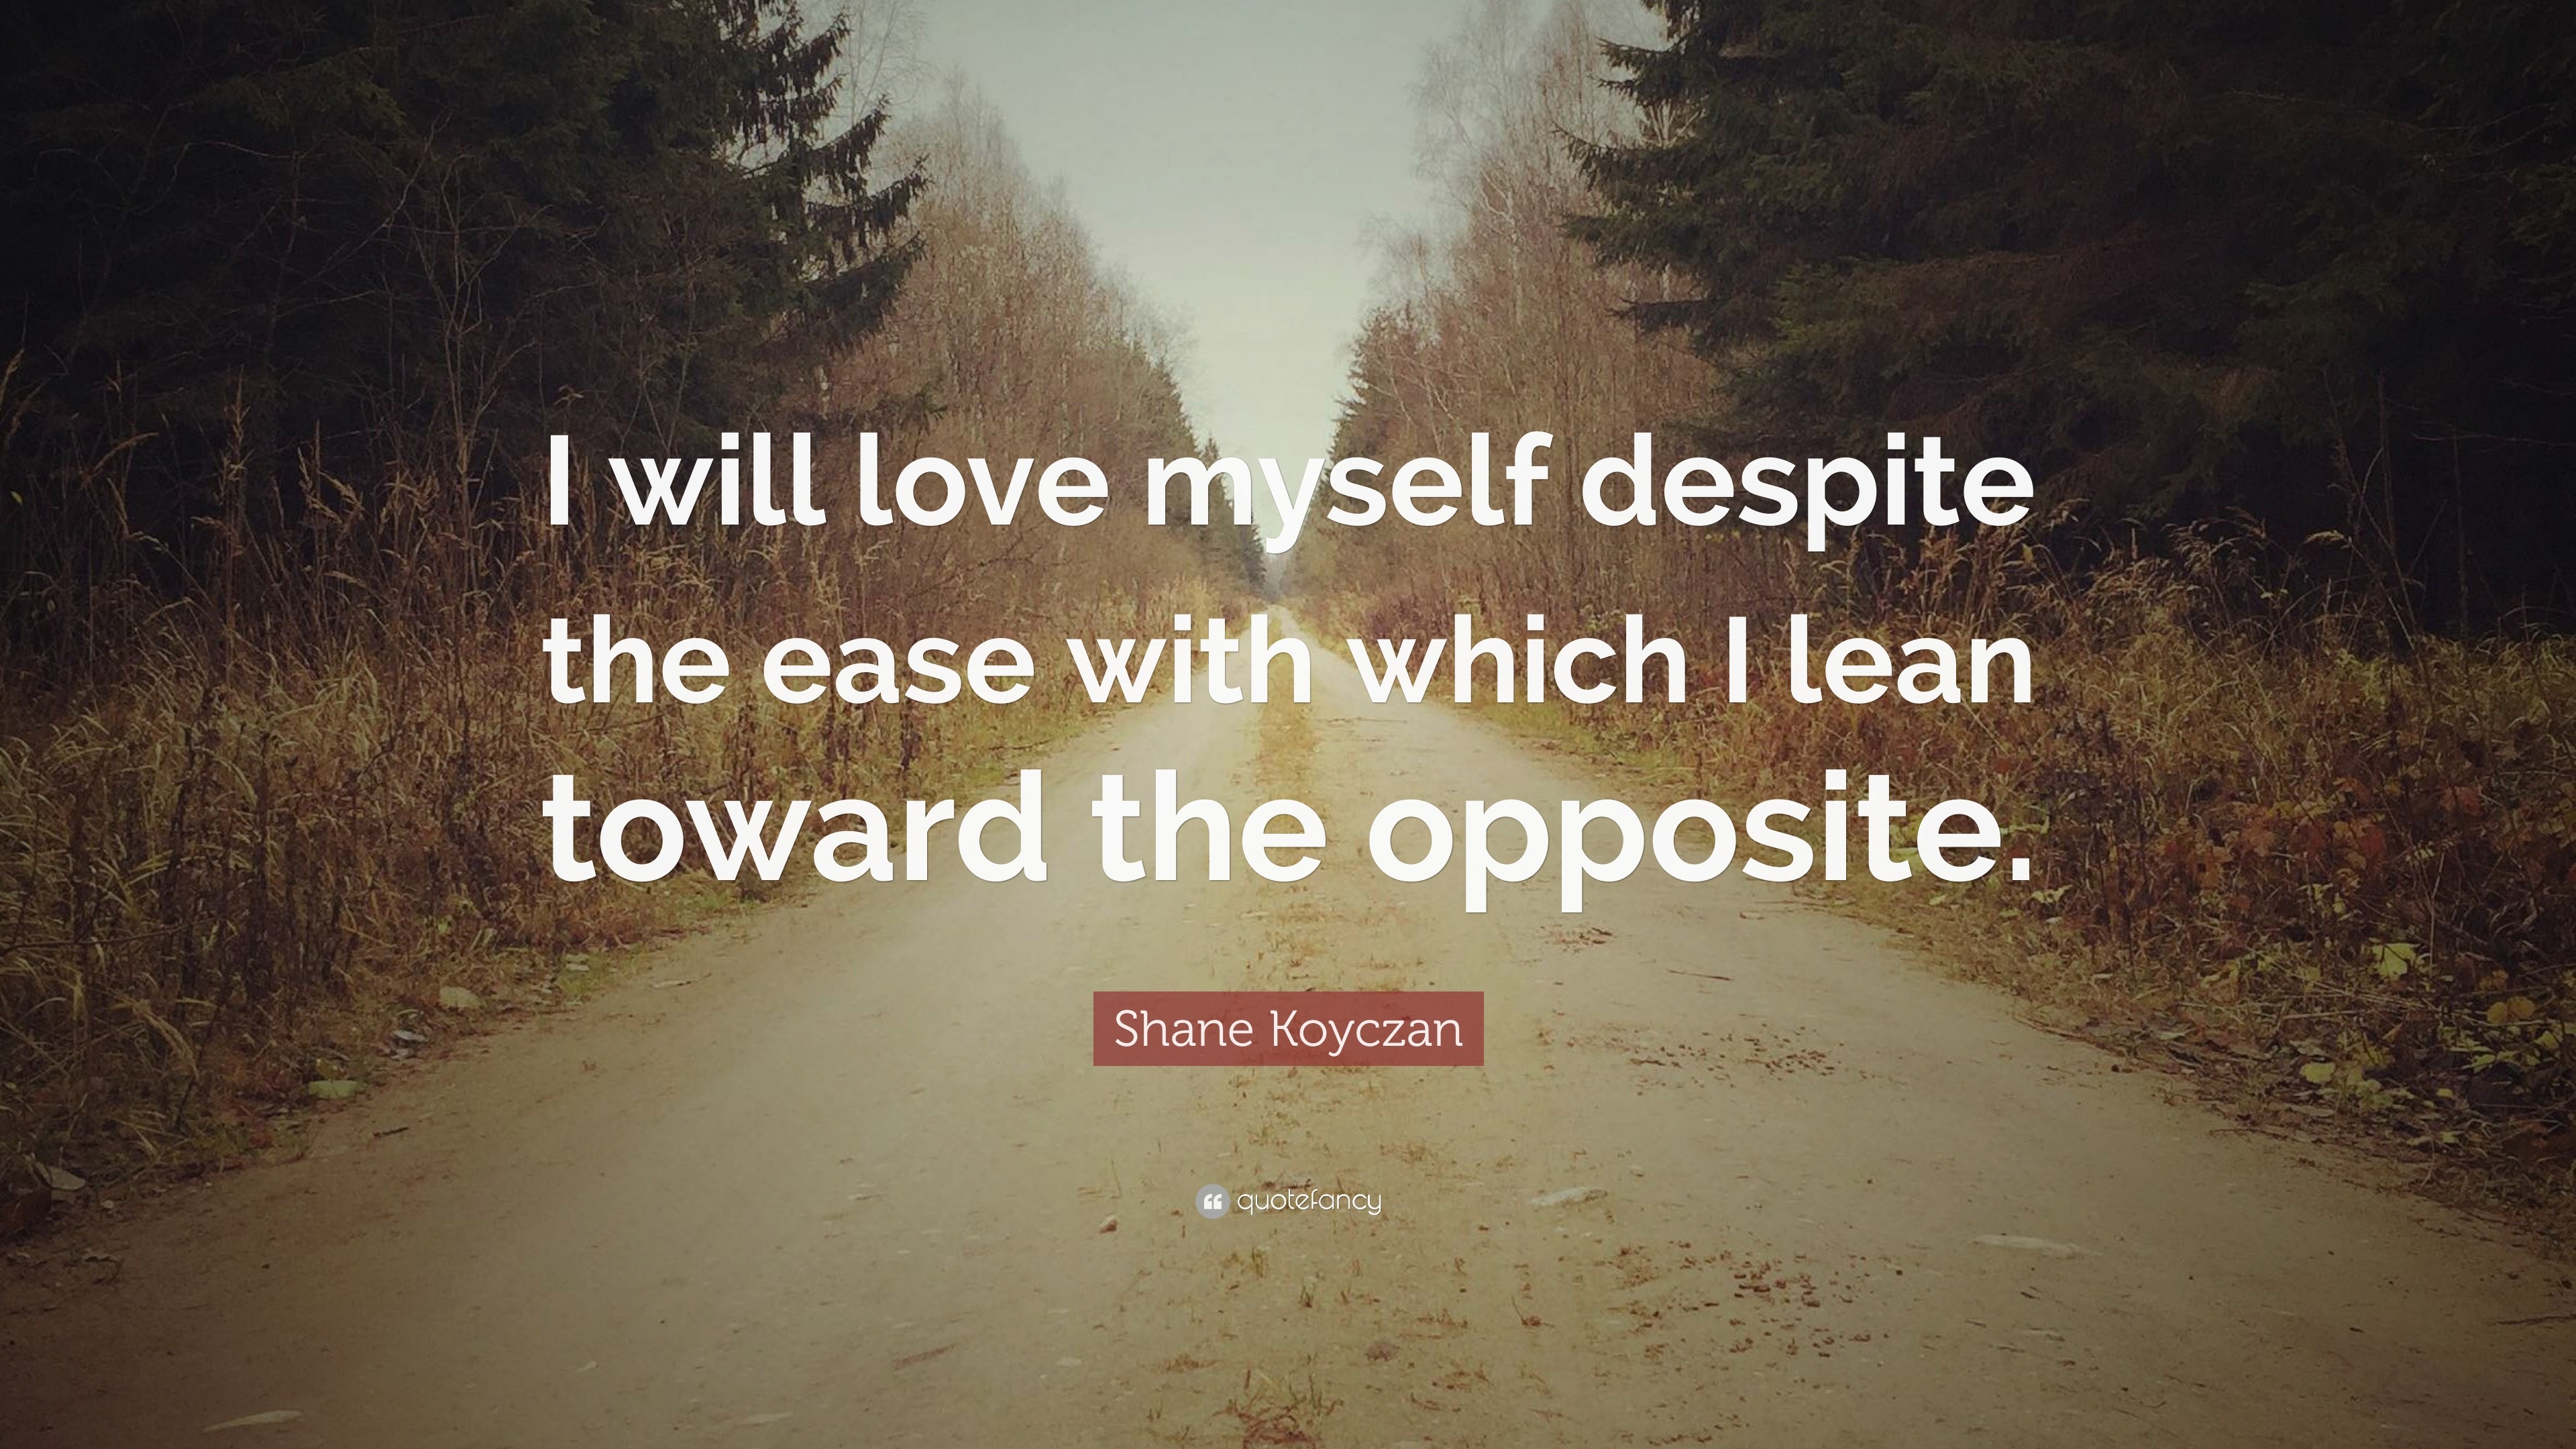 Shane Koyczan Quote “I will love myself despite the ease with which I lean